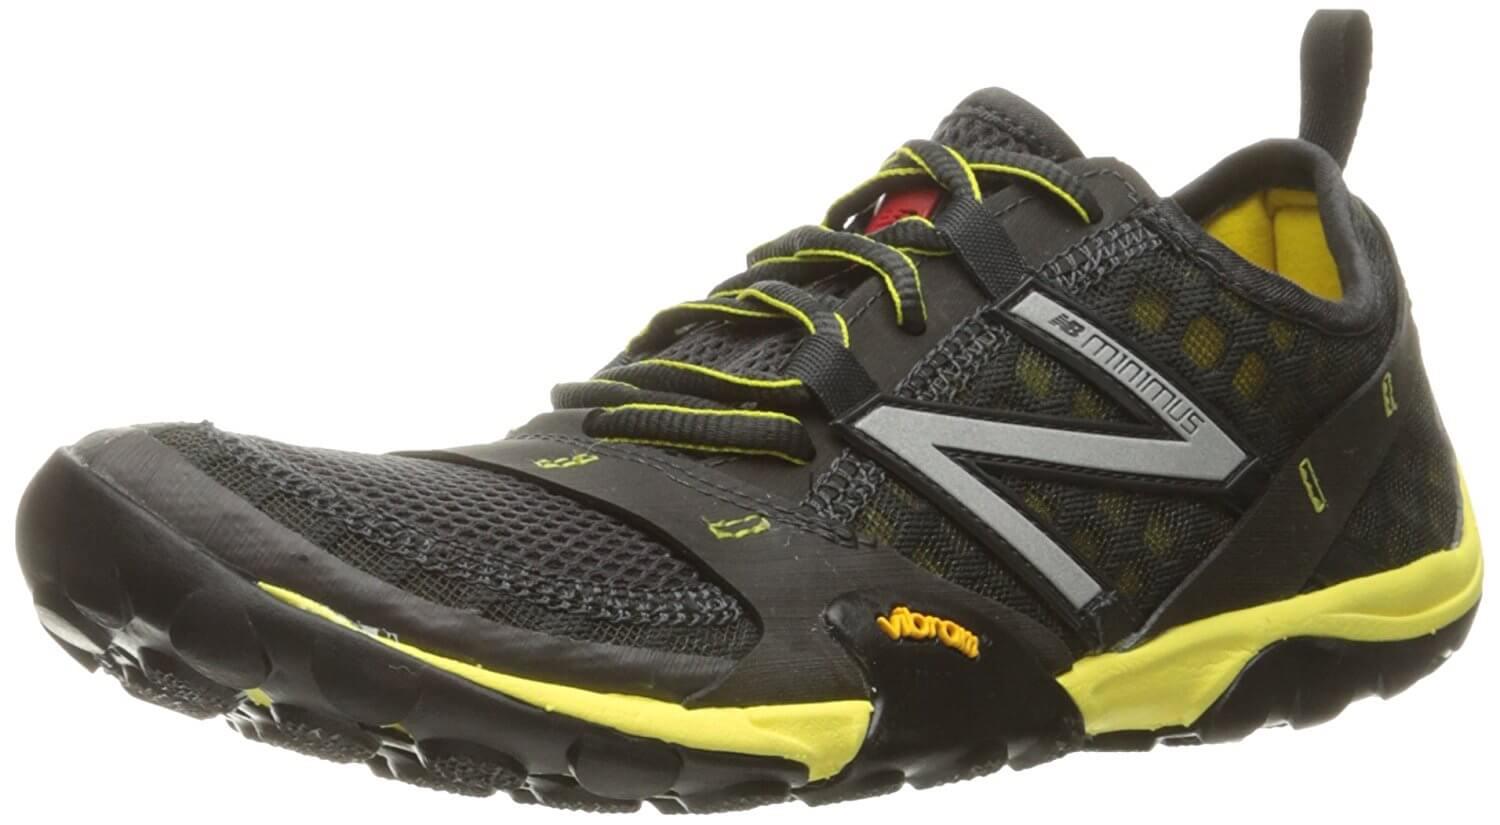 This shoe is stylish and clean, reminscent of many newer New Balance shoes.